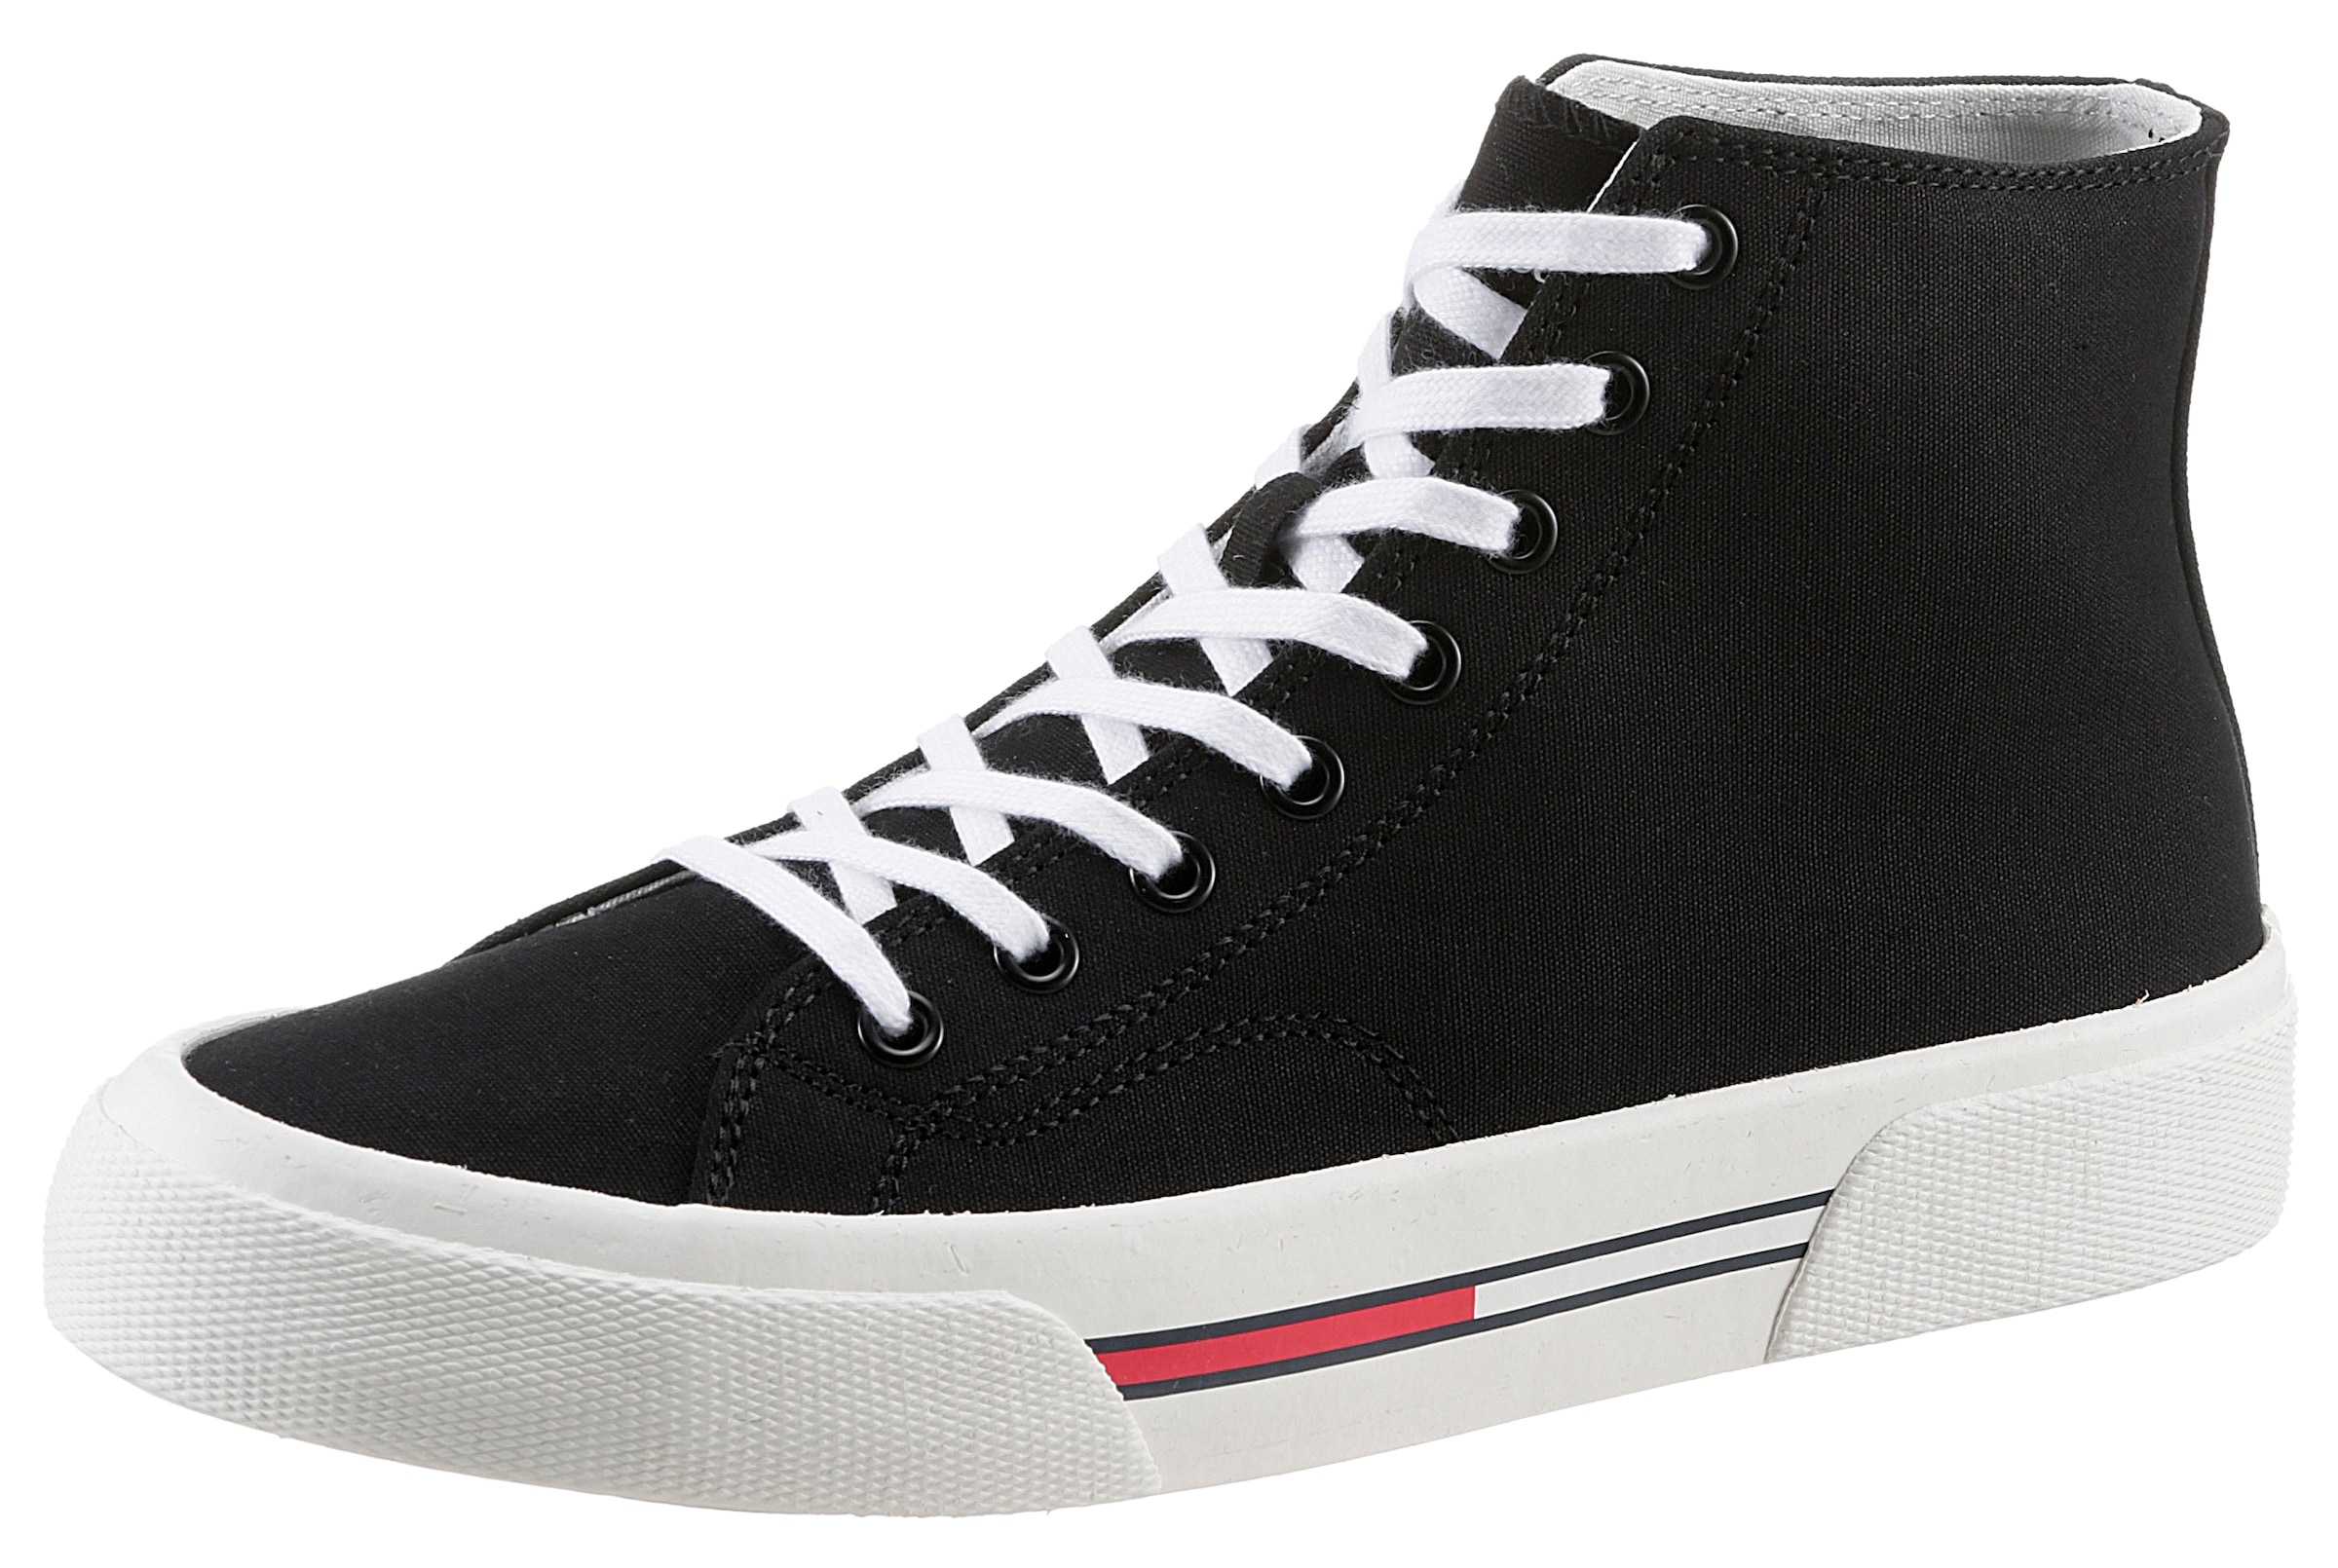 Tommy Jeans Sneaker »TOMMY JEANS MID CANVAS COLOR«, mit Used-Laufsohle mit Bio-Material-Anteil, Freizeitschuh, Halbschuh